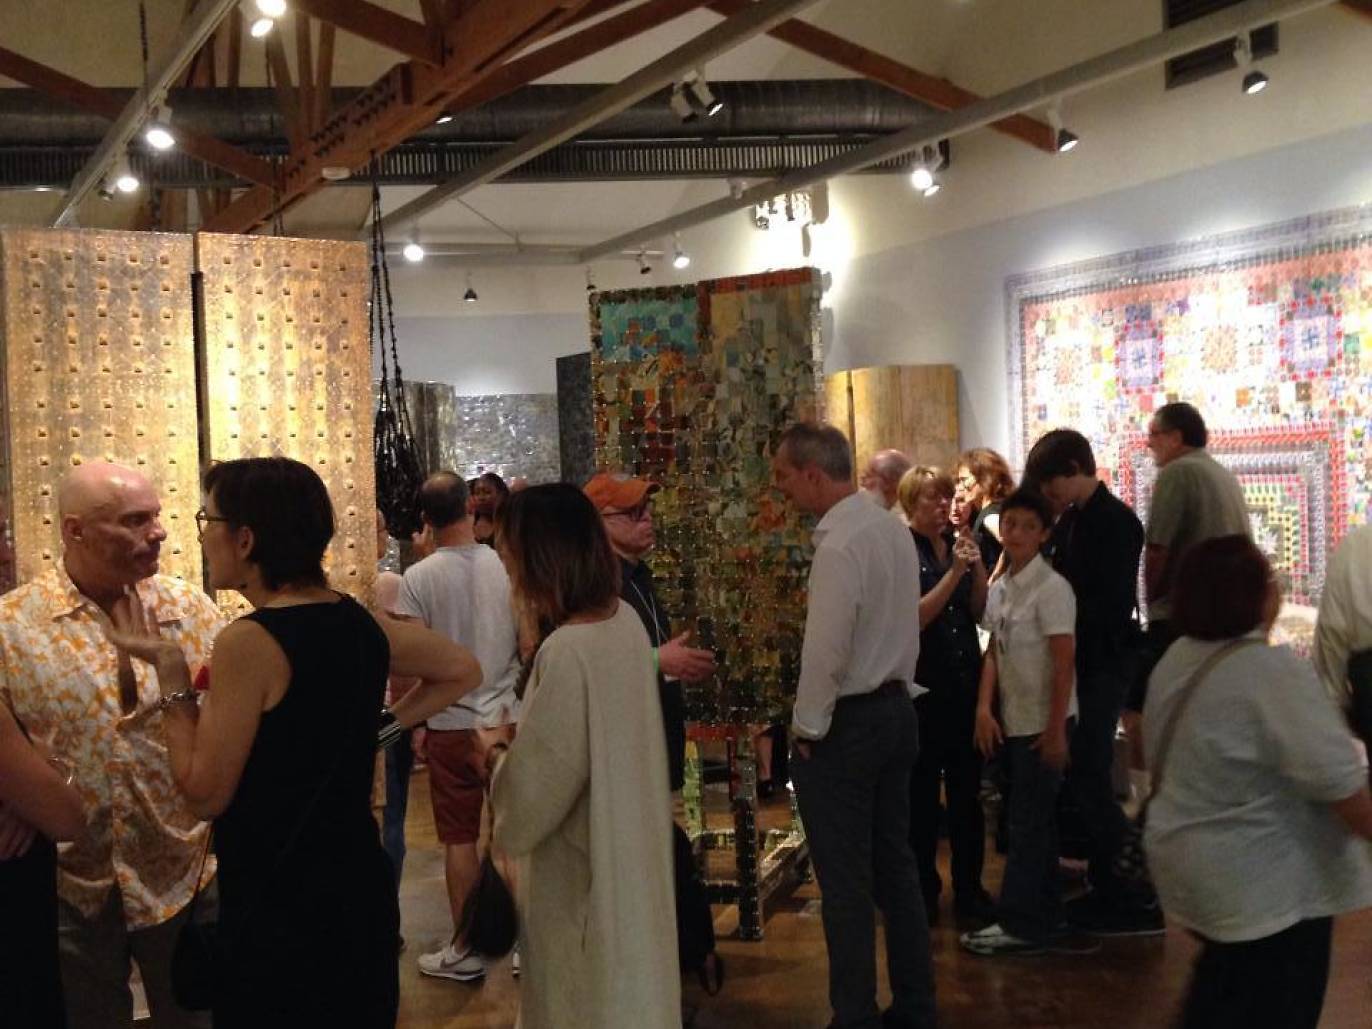 Best art walk options in L.A. for art, live music and more